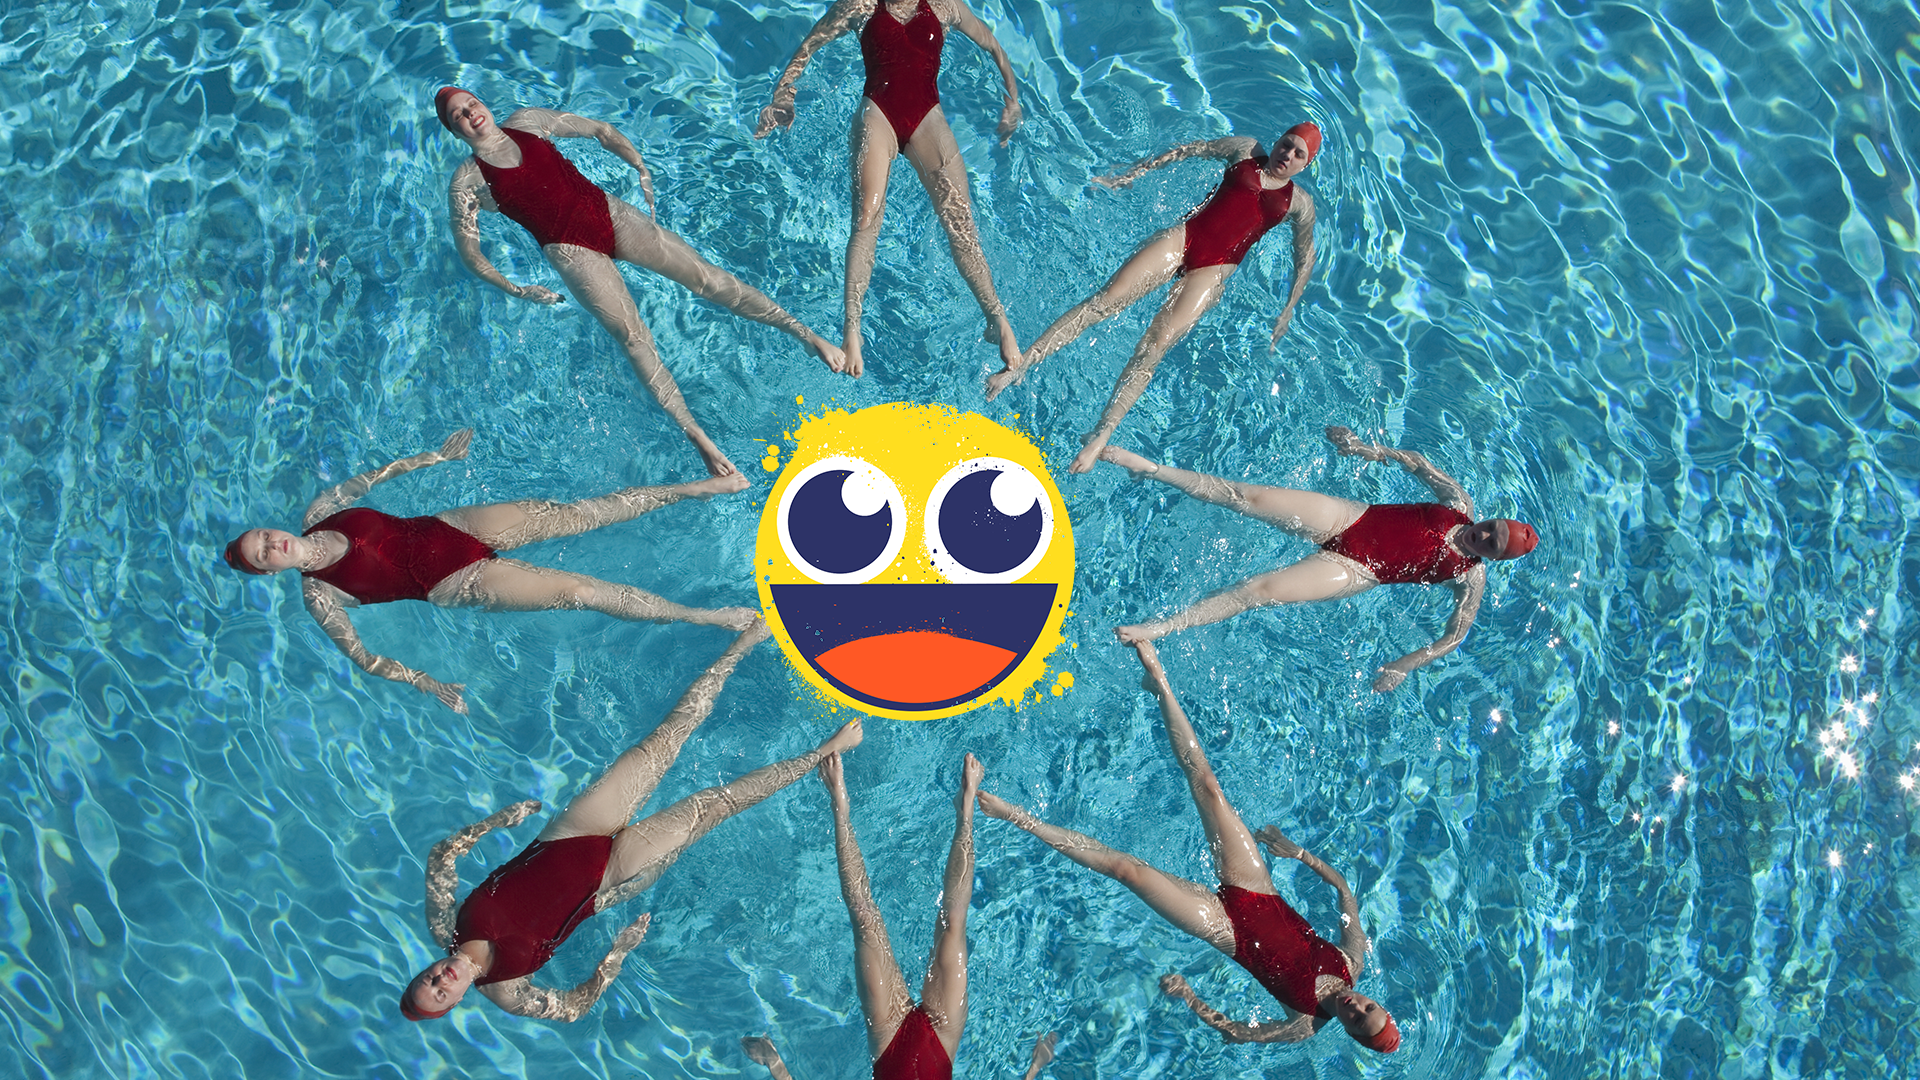 Swimmers in pool with emoji